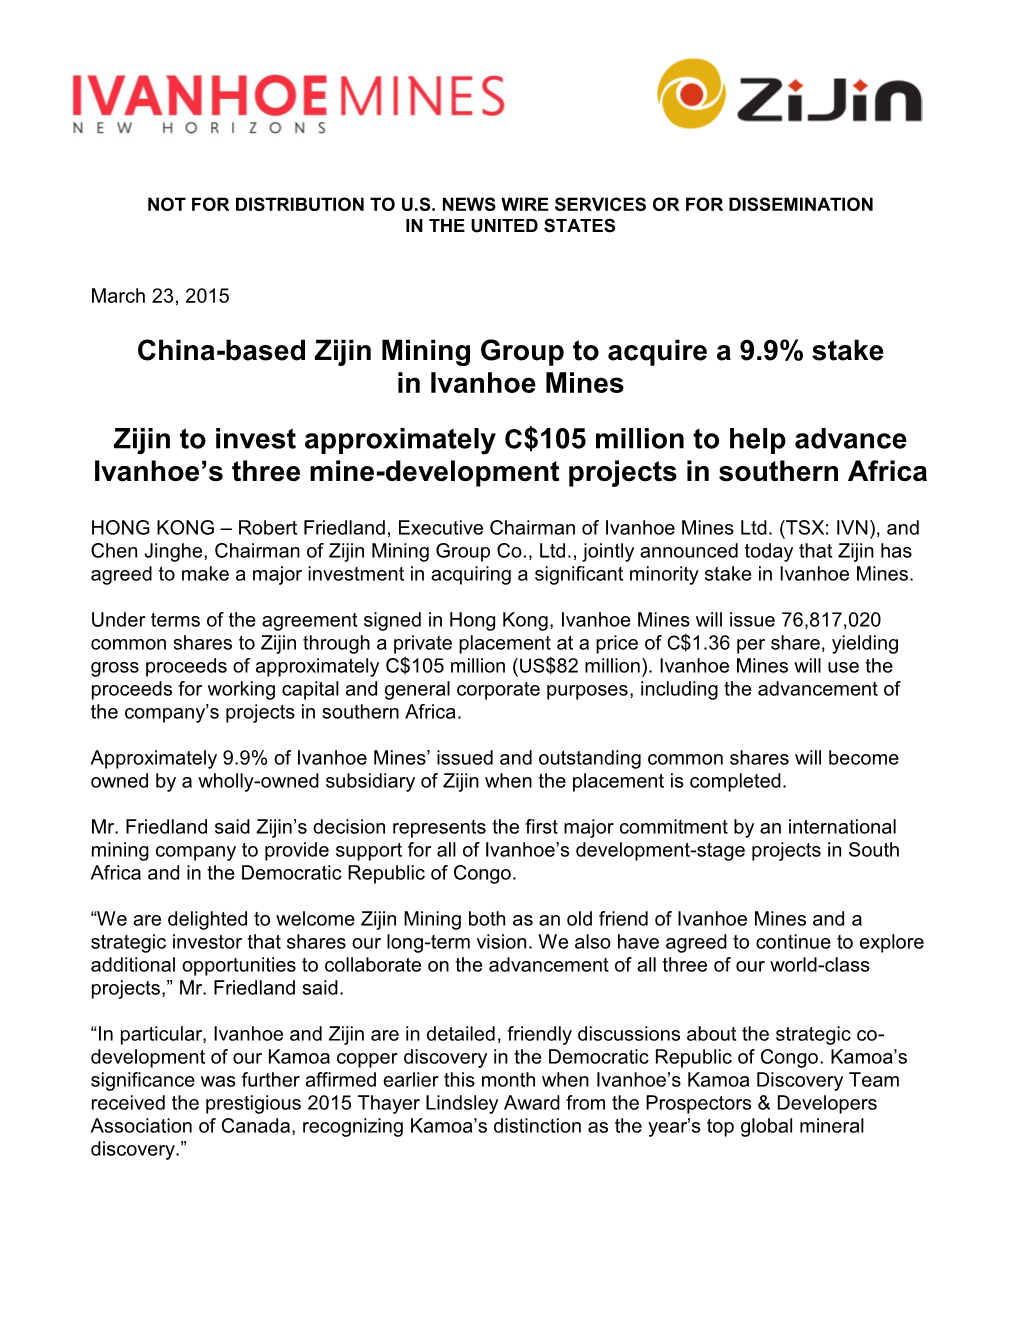 China-Based Zijin Mining Group to Acquire a 9.9% Stake in Ivanhoe Mines